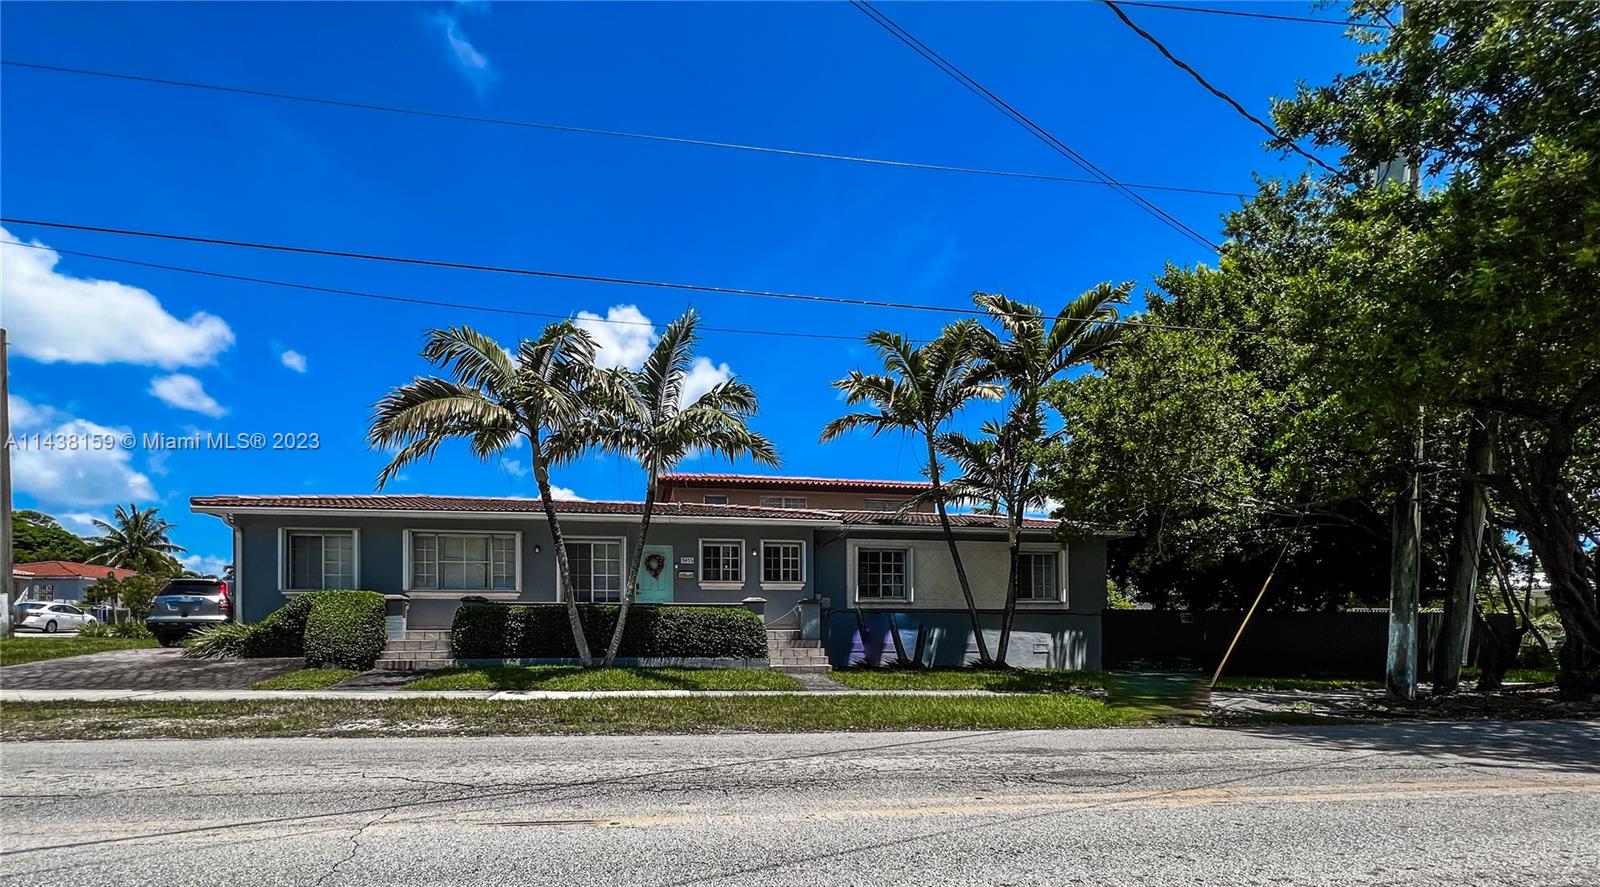 Rarely available 5,720 sq.ft. corner lot (zoned duplex) in southern Coconut Grove!  Conveniently located a short drive from Brickell/Downtown & within a mile of world-class dining & shopping at Miracle Mile, Downtown Coral Gables, Shops at Merrick Park, & CocoWalk. Walking distance to public transit, the Miami Underline, & Douglas Park.  

Build twin townhomes, remodel the existing property into your dream home, or generate immediate rental income. Current property is a single family home converted into a 2/1 main home & 1/1 in-law quarters with separate entrance. 1/1 is occupied by tenants on a month-to-month basis paying below market rent of $1275/mo.